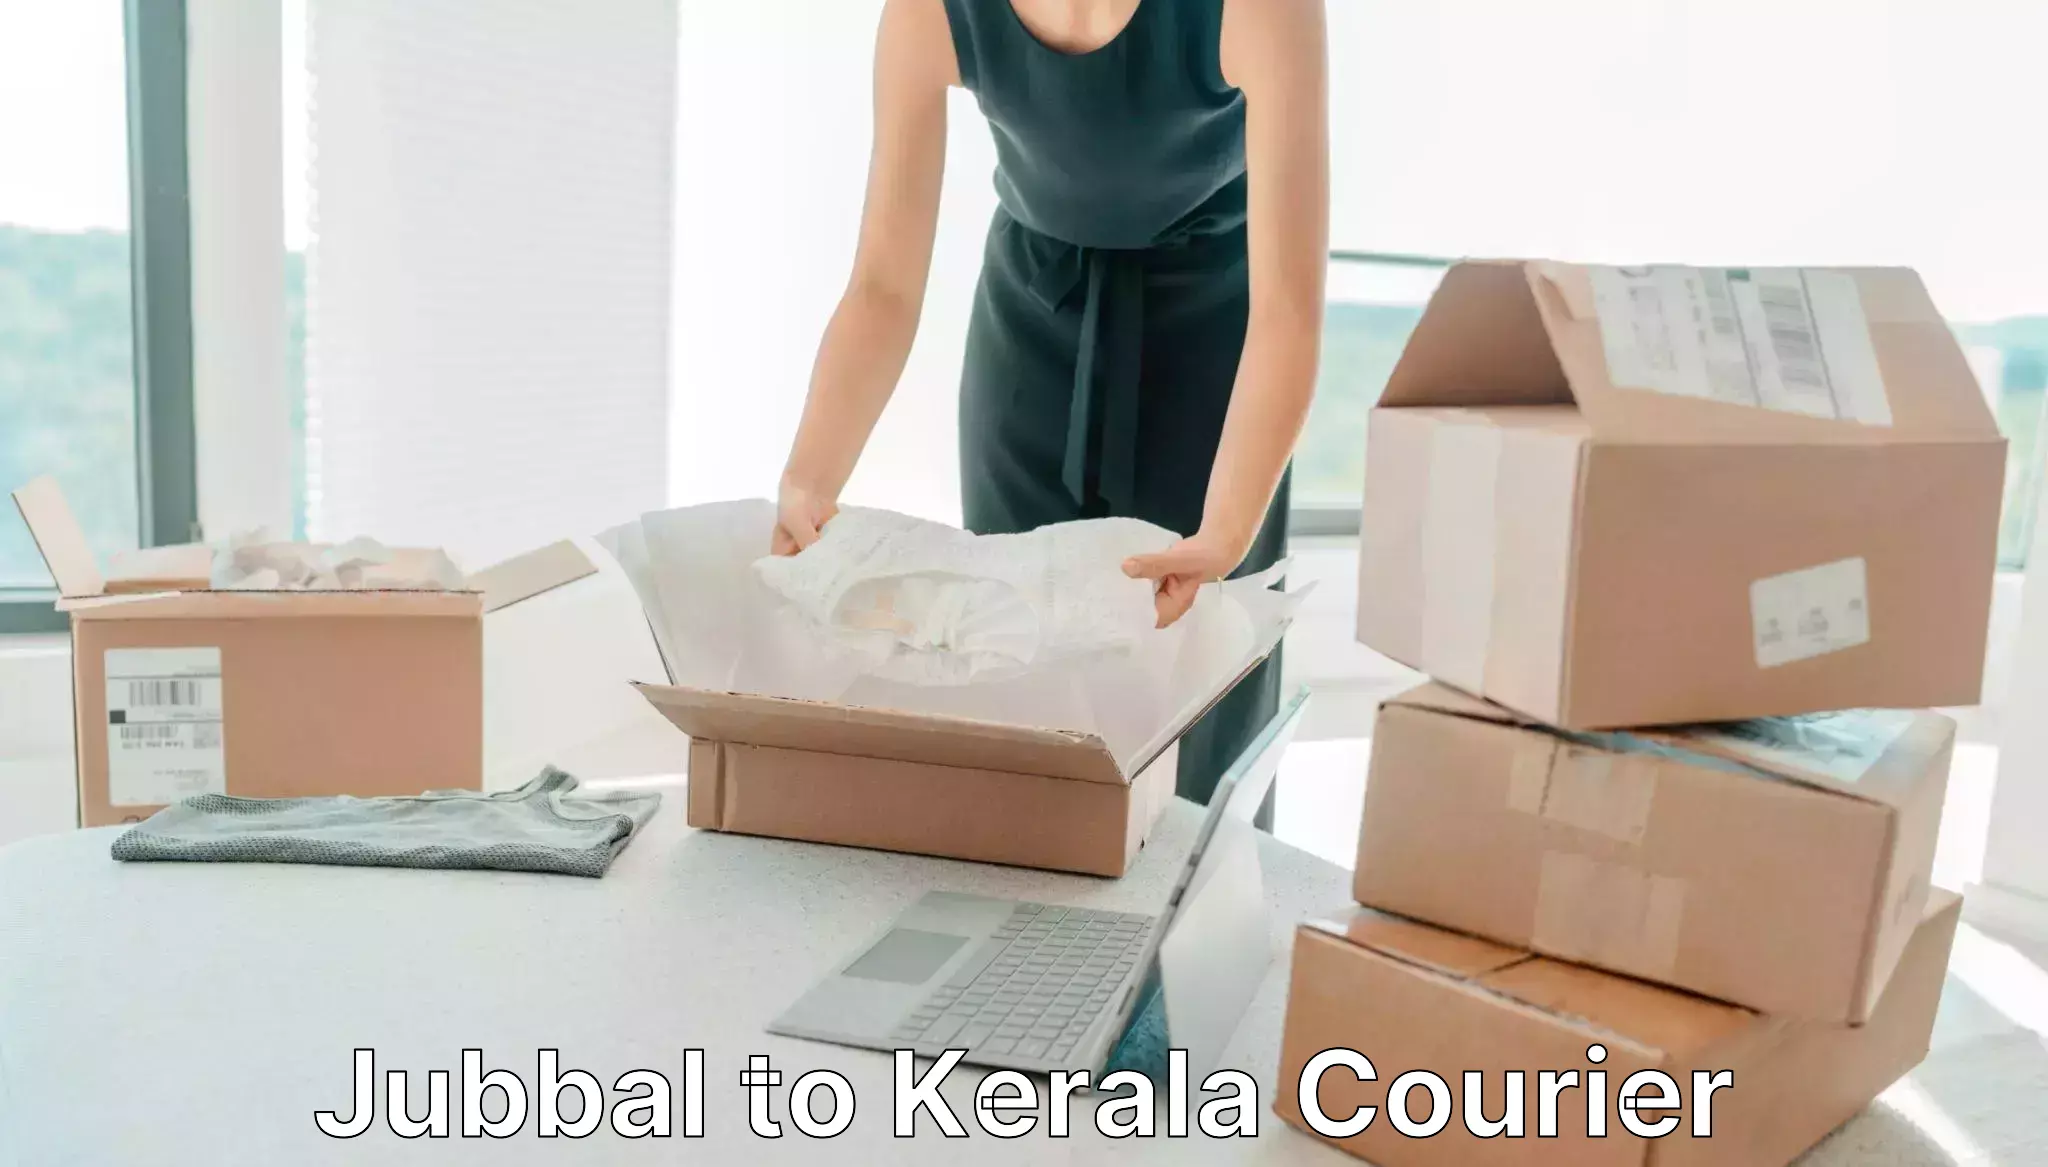 Courier service comparison in Jubbal to Alathur Malabar